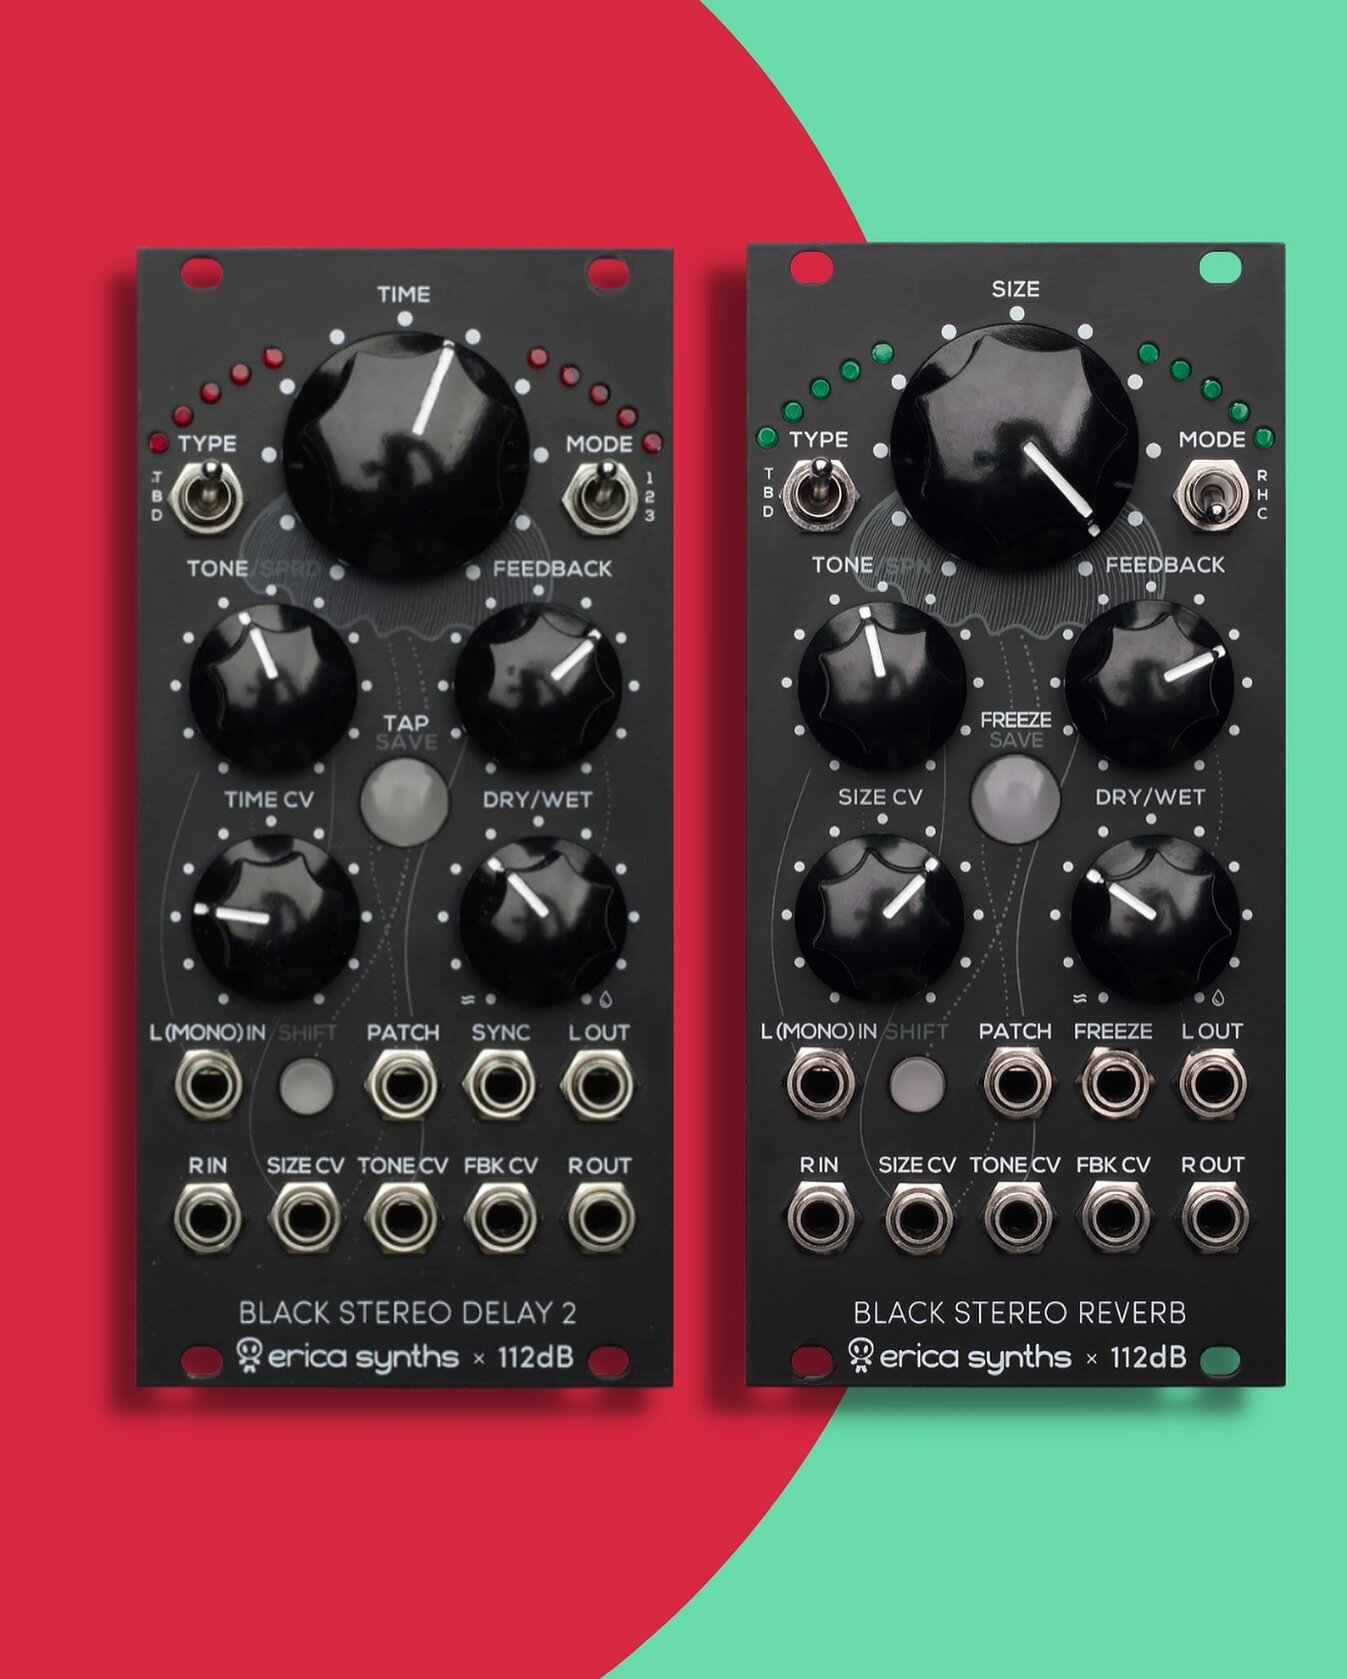 ⚫️🔴🟢 @ericasynths BLACK STEREO REVERB &amp; DELAY 2 Review is out now on sinesquares.net - LINK IN BIO 🔗
📝 Erica synths totally nailed it with those two! Amazing build quality, great layout, and, most importantly, beautiful-sounding stereo effect